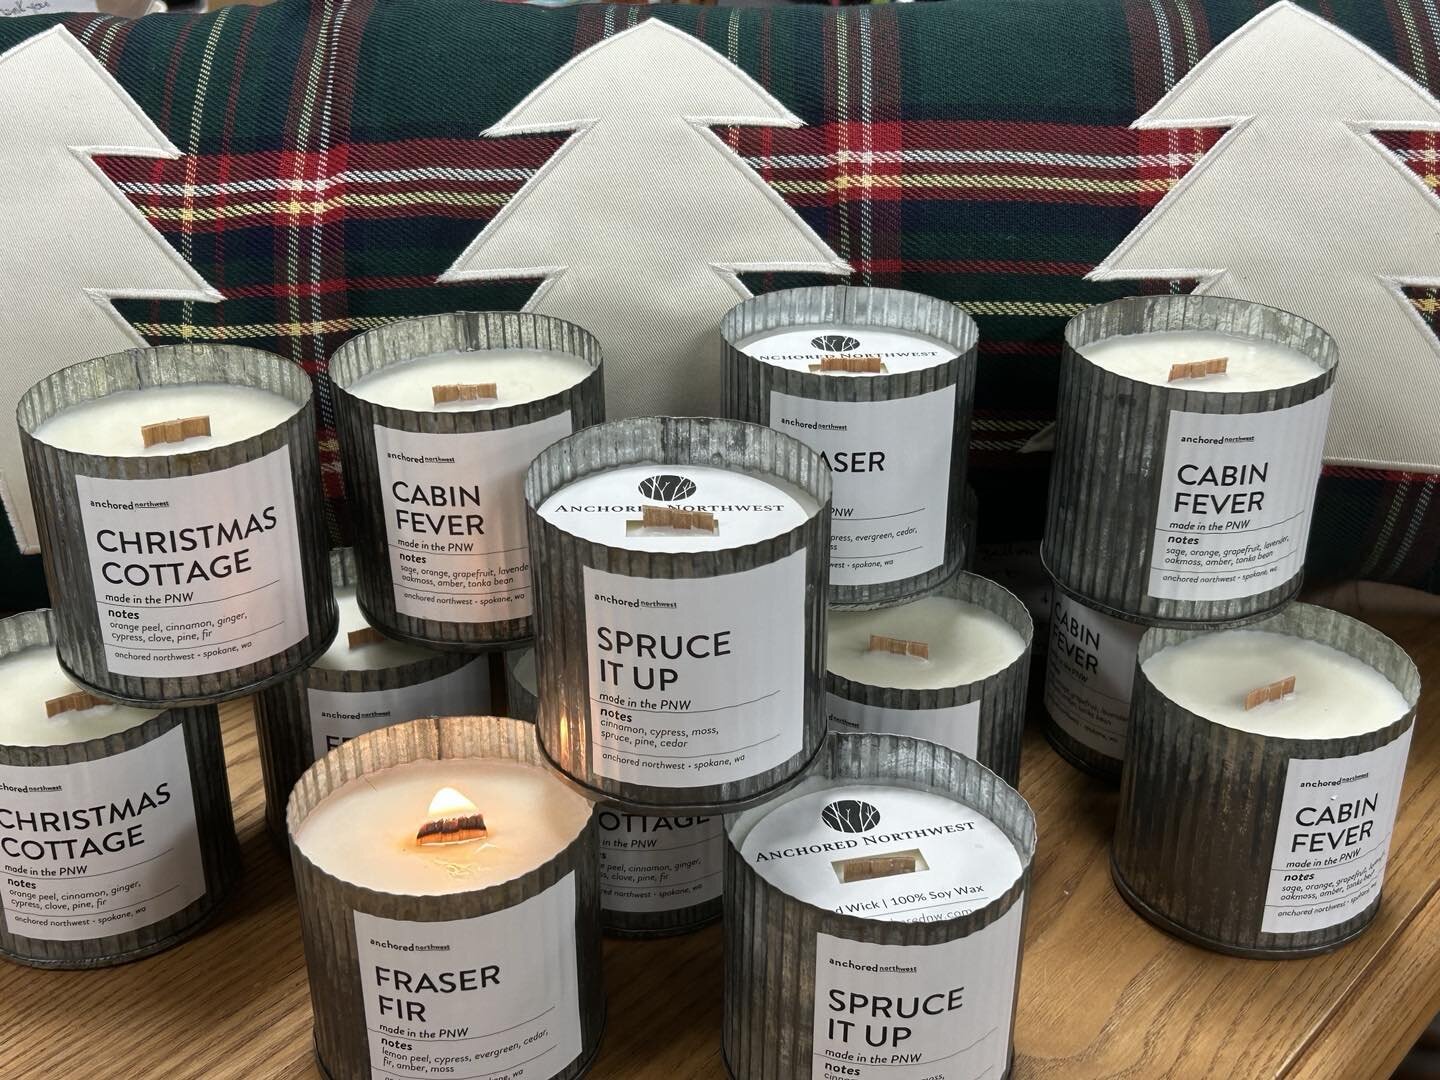 Candles for Christmas. Notes of lemon peel, Cypress, Evergreen, Cedar, Amber, and Moss = Fraser Fur. That says it all.